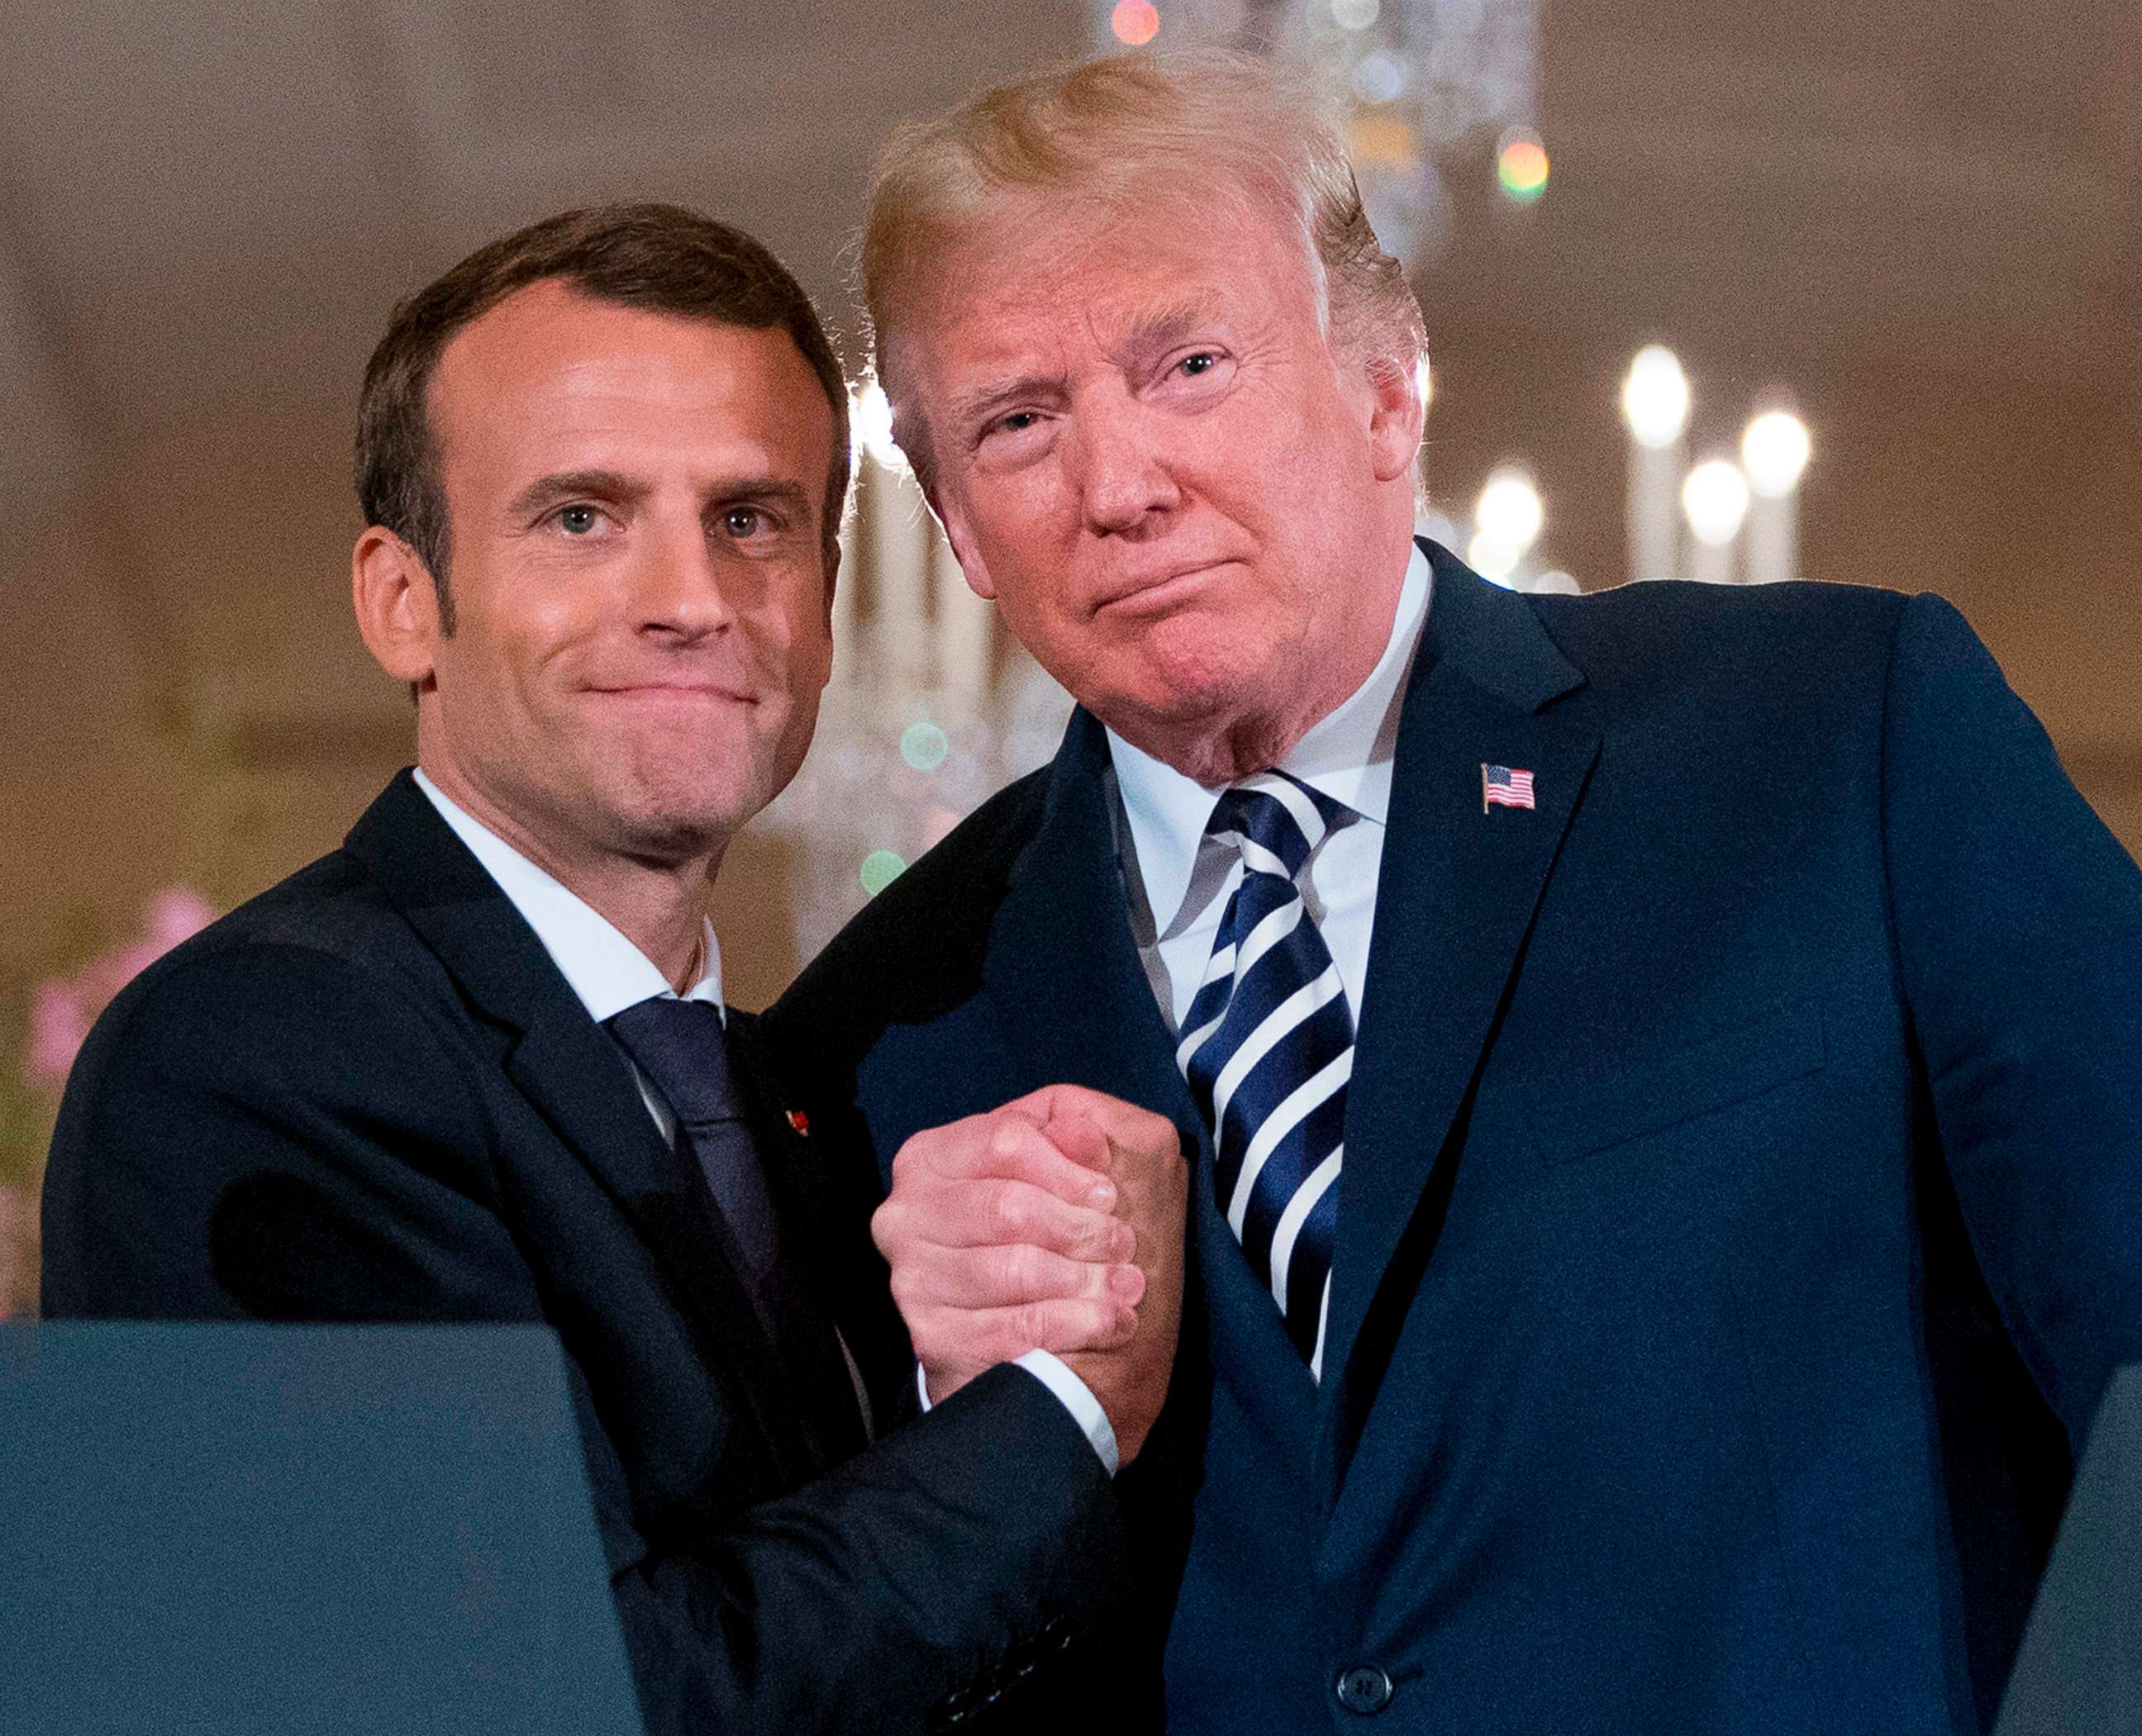 PHOTO: French President Emmanuel Macron and President Donald Trump and embrace at the conclusion of a news conference in the East Room of the White House in Washington, April 24, 2018.